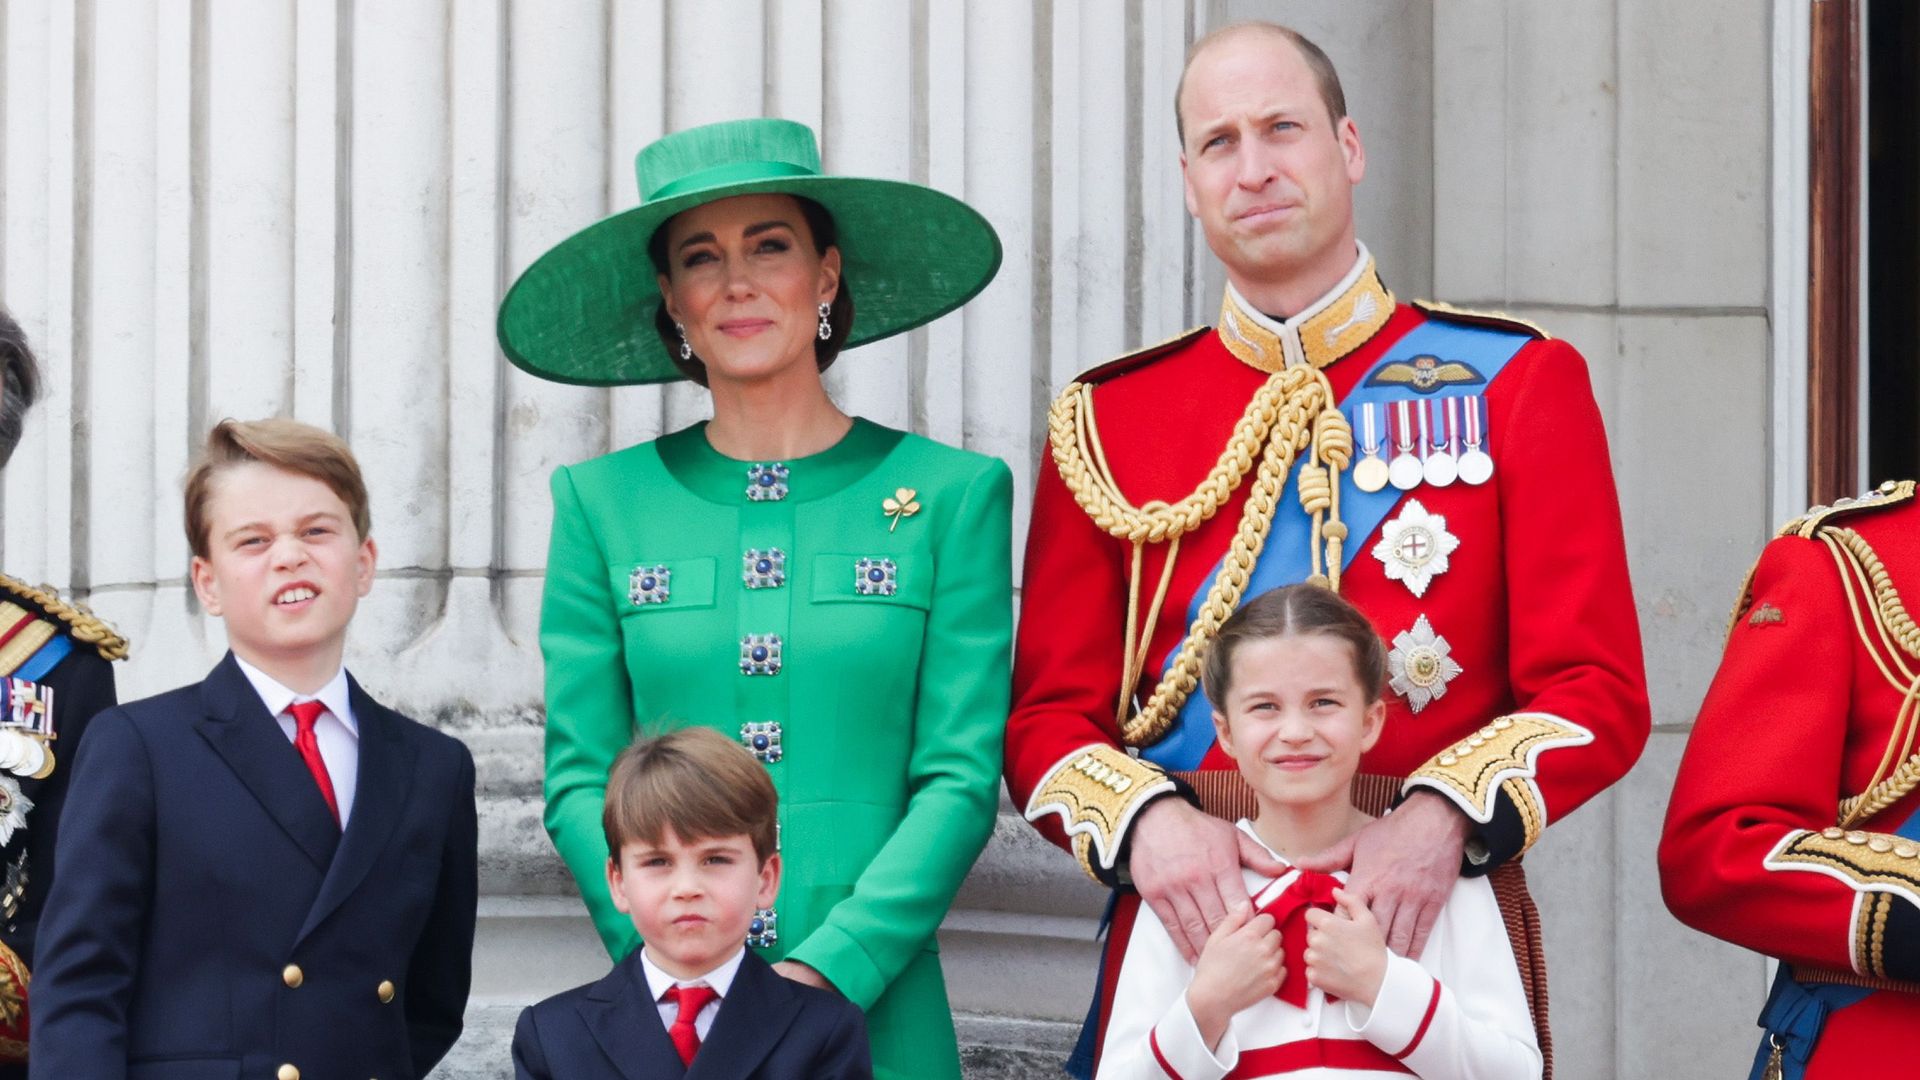 William prince louis father shares fathers son adorable mark royalty hello his family honour royal trooping